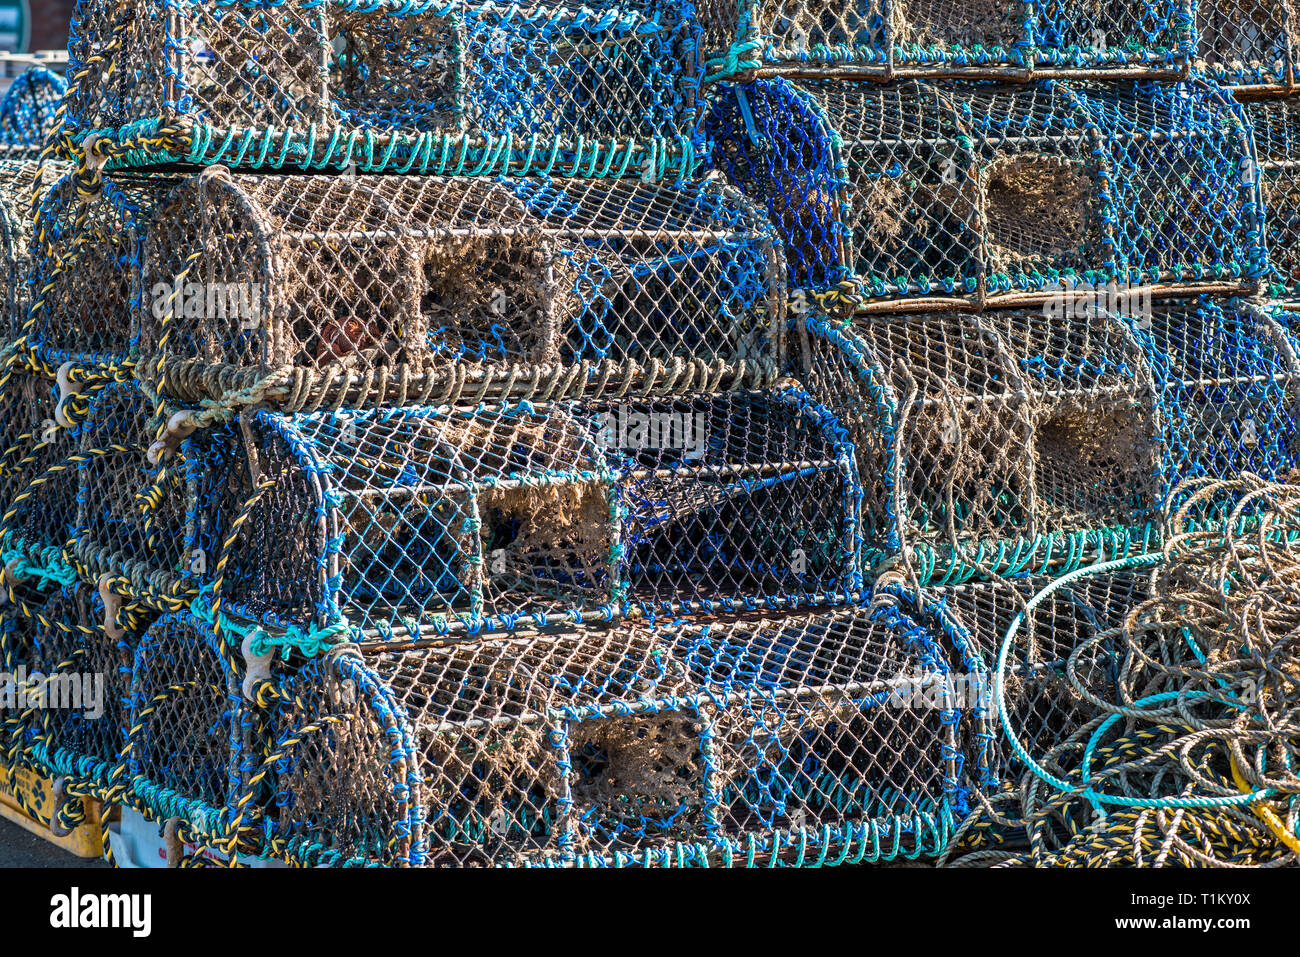 Crab and lobster pots or creels stacked on Wells-next-the-sea seafront. North Norfolk coast, East Anglia, England, UK. Stock Photo